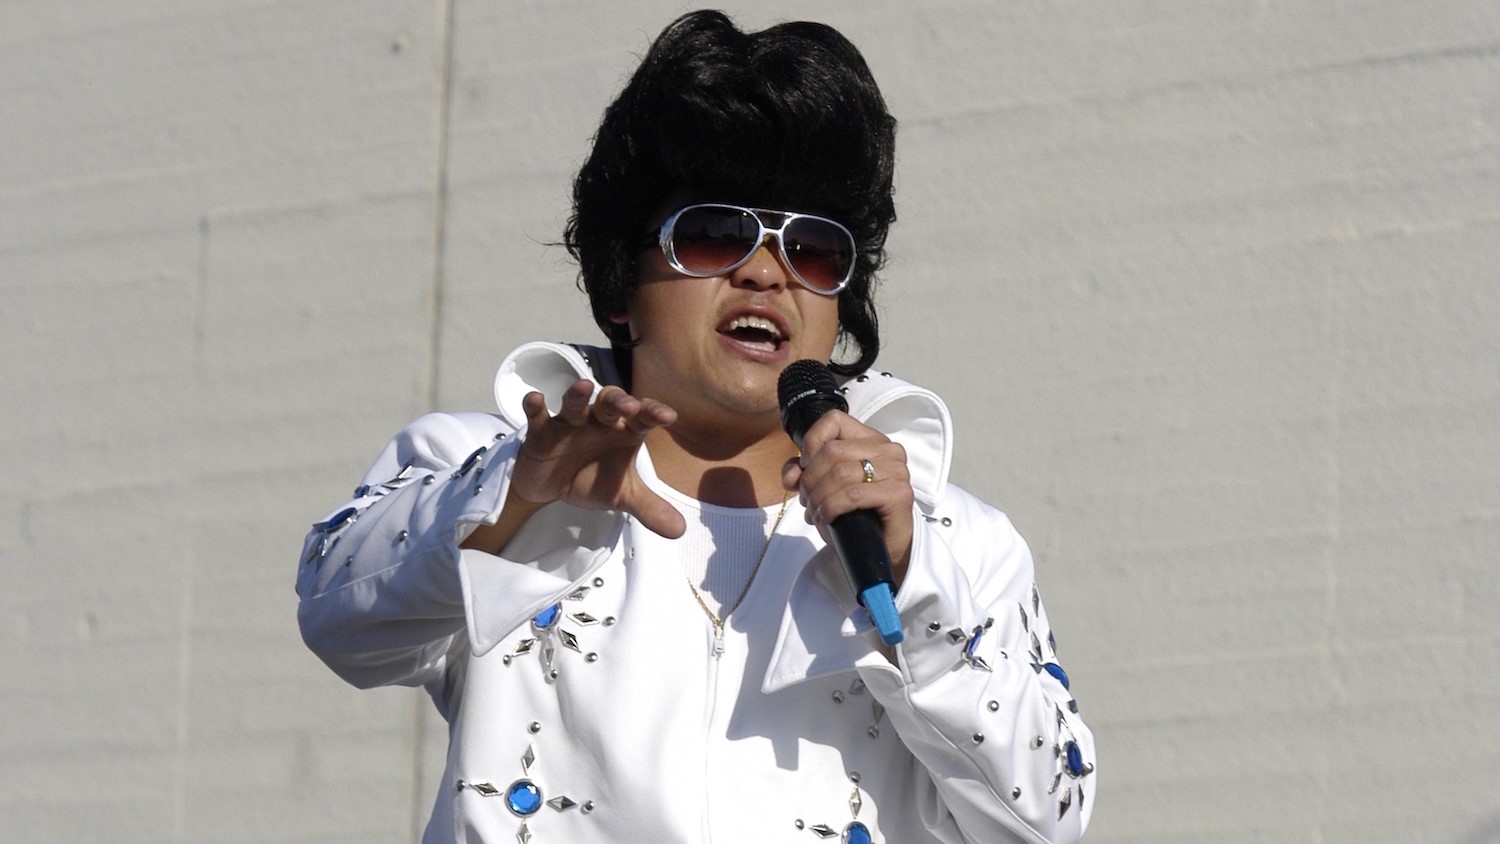 Tou Ger impersonating Elvis at the First Tamejavi Festival in 2002 in Fresno, CA